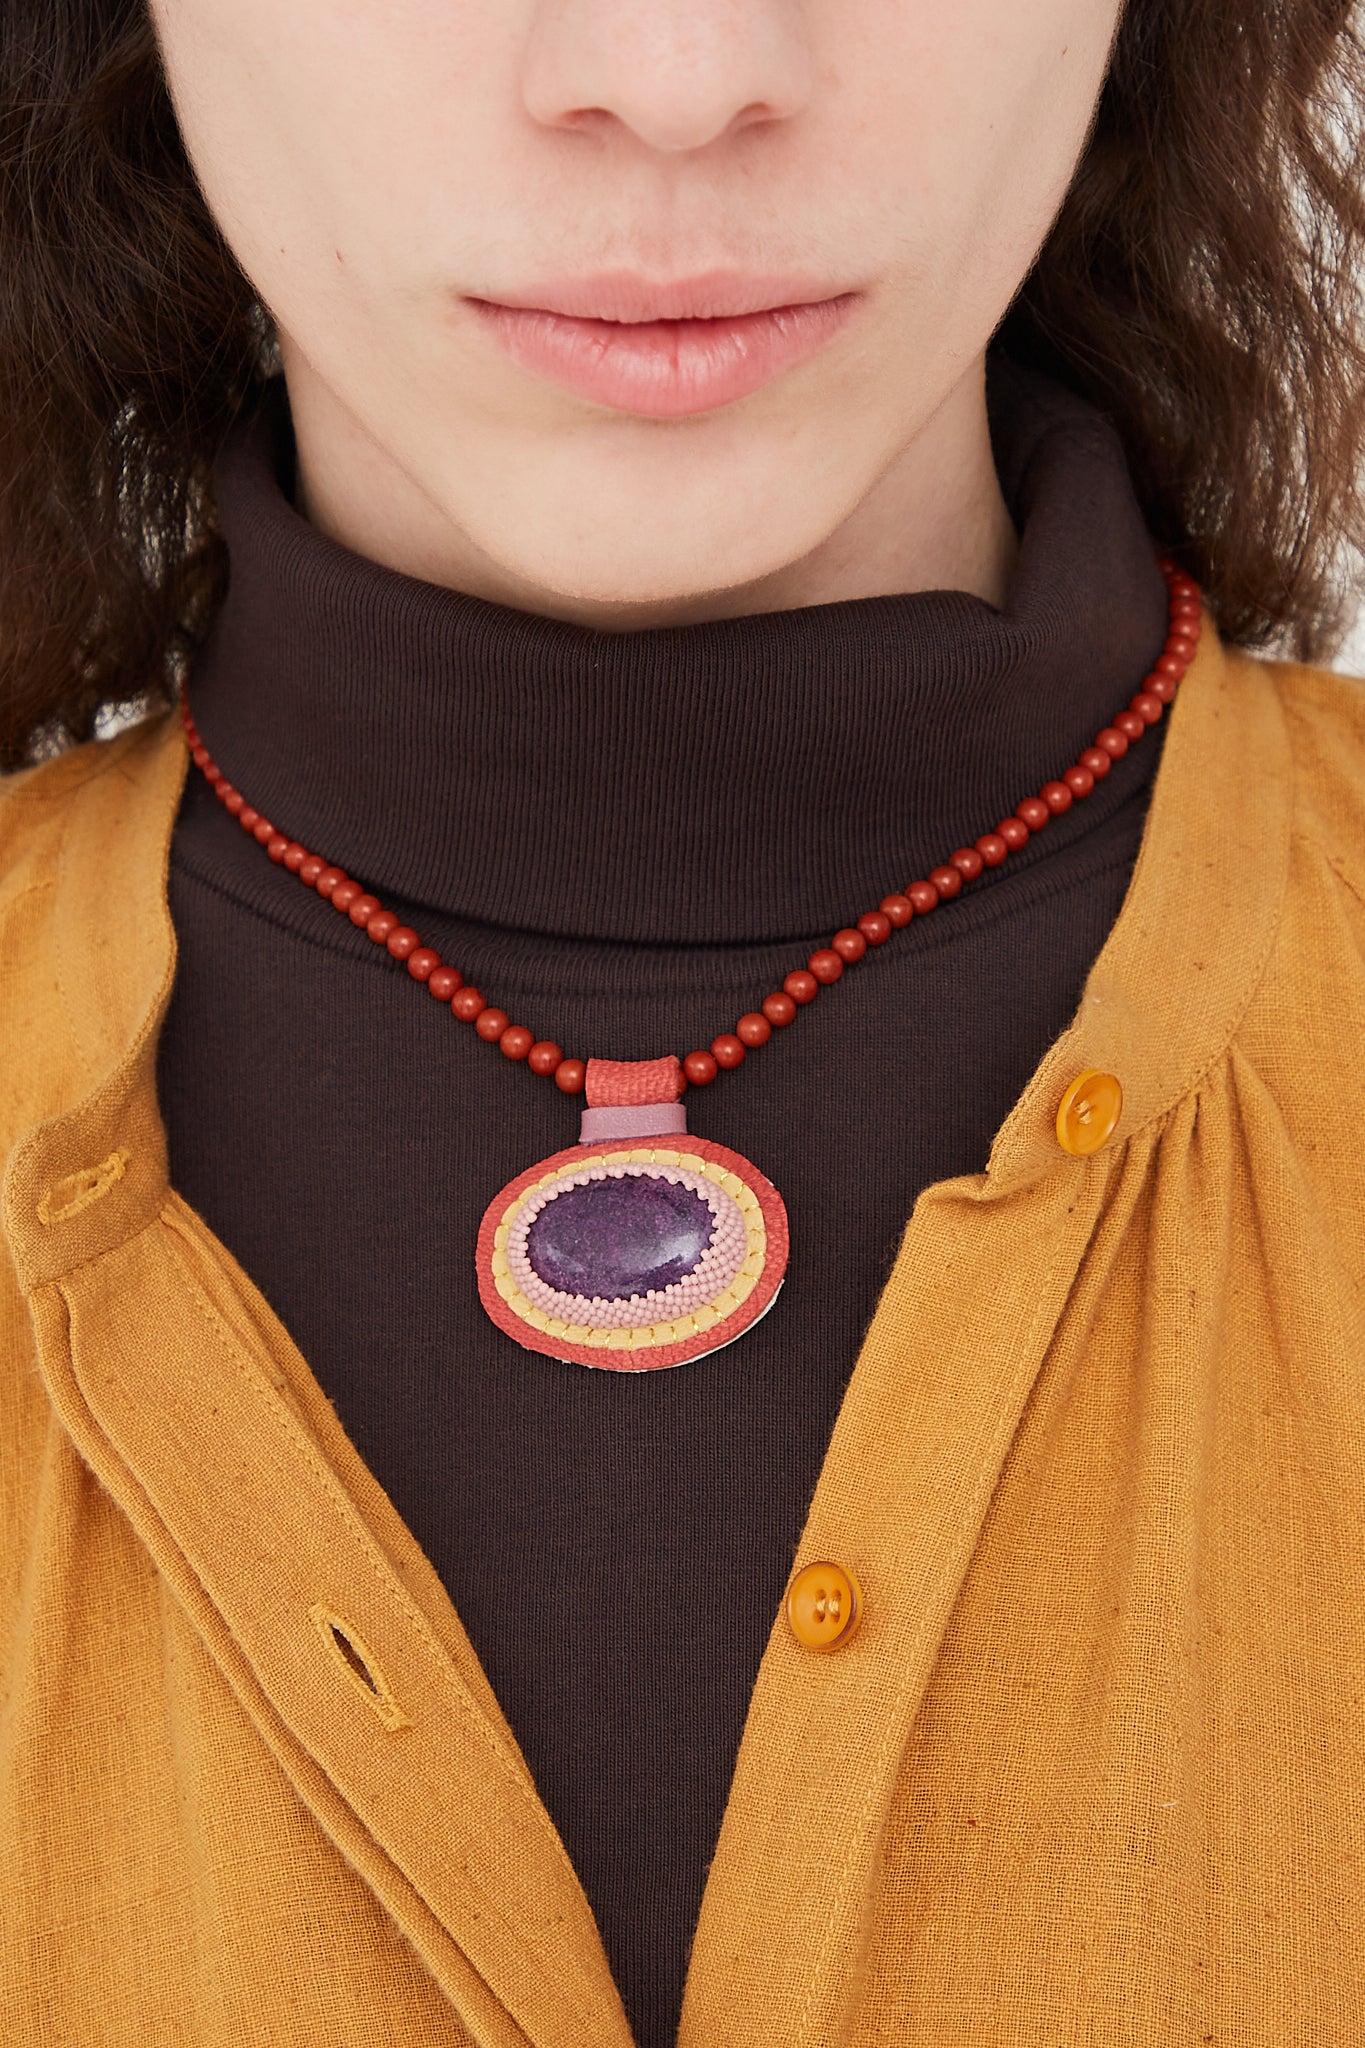 A woman wearing a Robin Mollicone Charm Necklace in Red Jasper Beads and Purpurite Charm, adorned with purpurite charm.